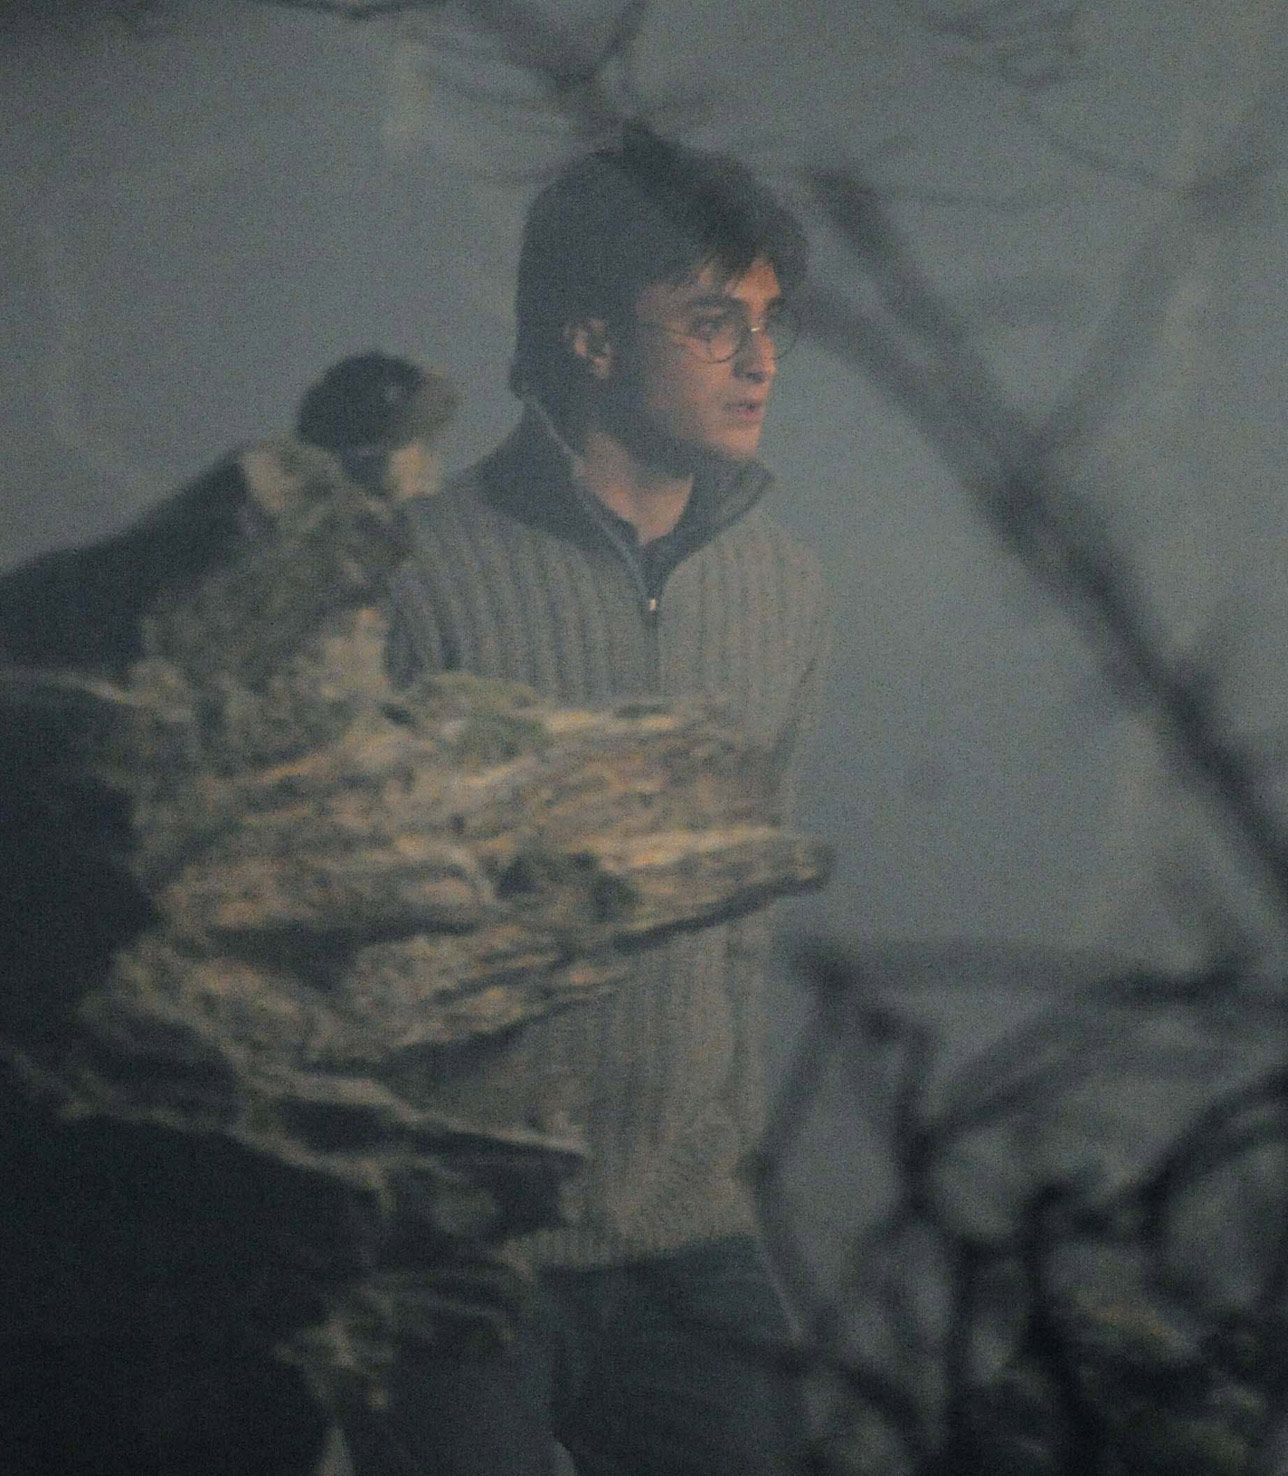 Harry Potter and the Deathly Hallows Image #4